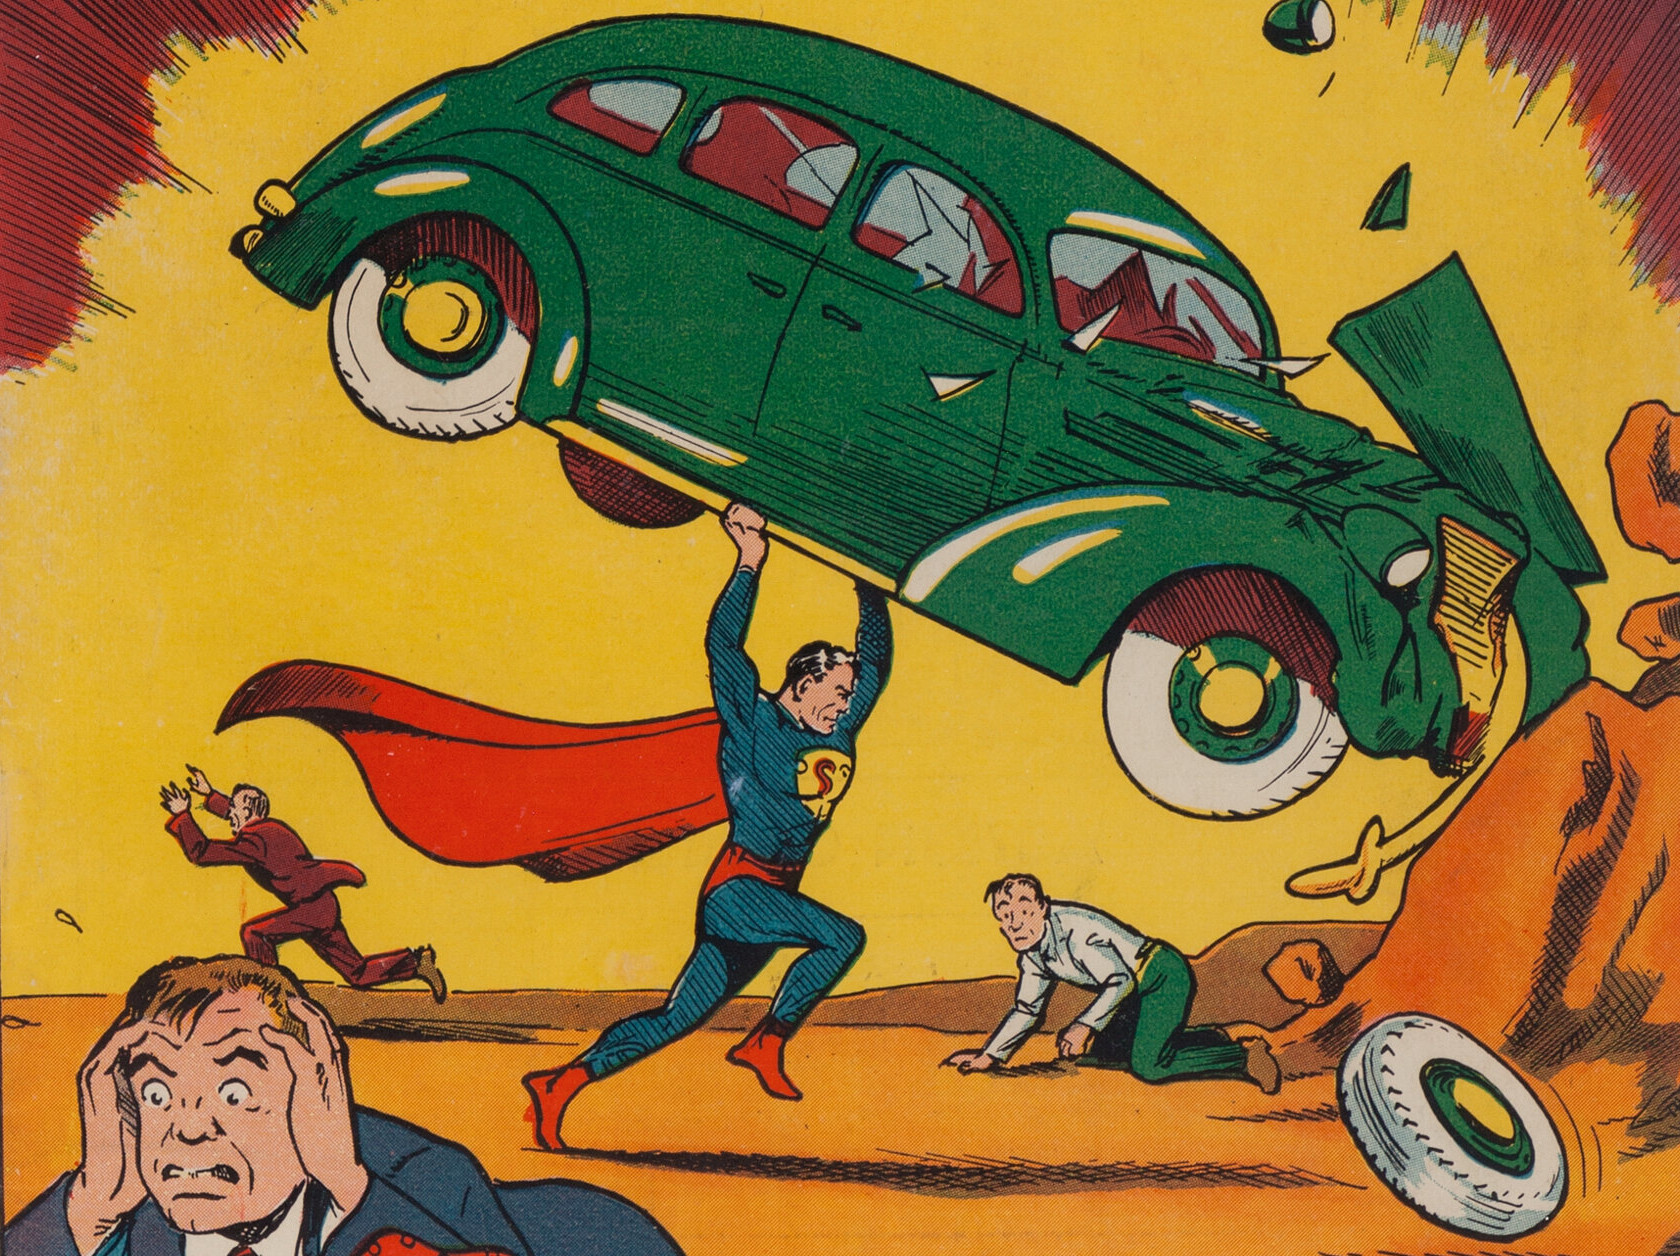 A detail of the cover of Action Comics Number 1 shows Superman lifting a car.